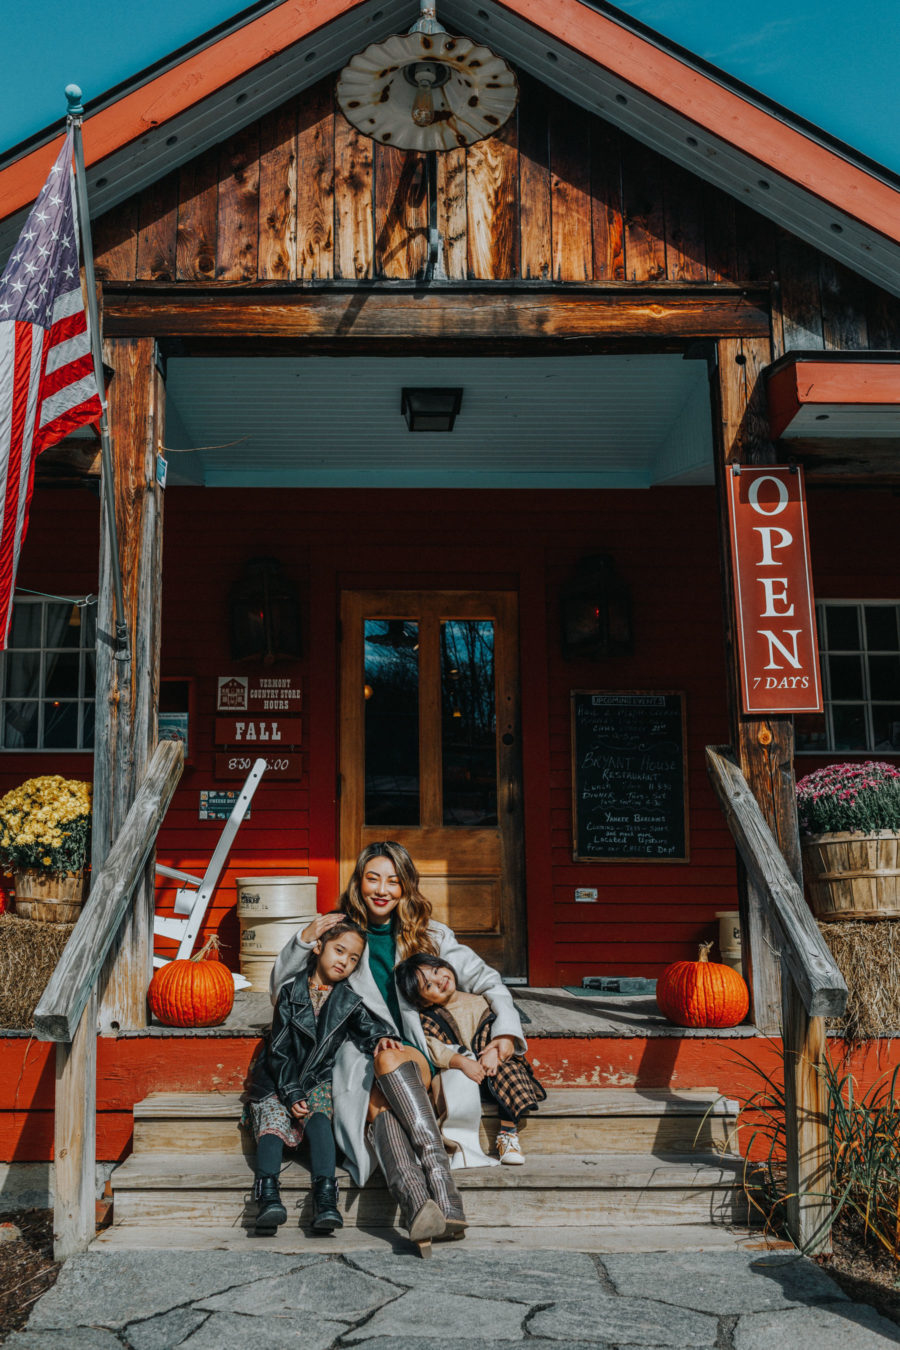 fun fall activities with the family in vermont // Jessica Wang - Notjessfashion.com